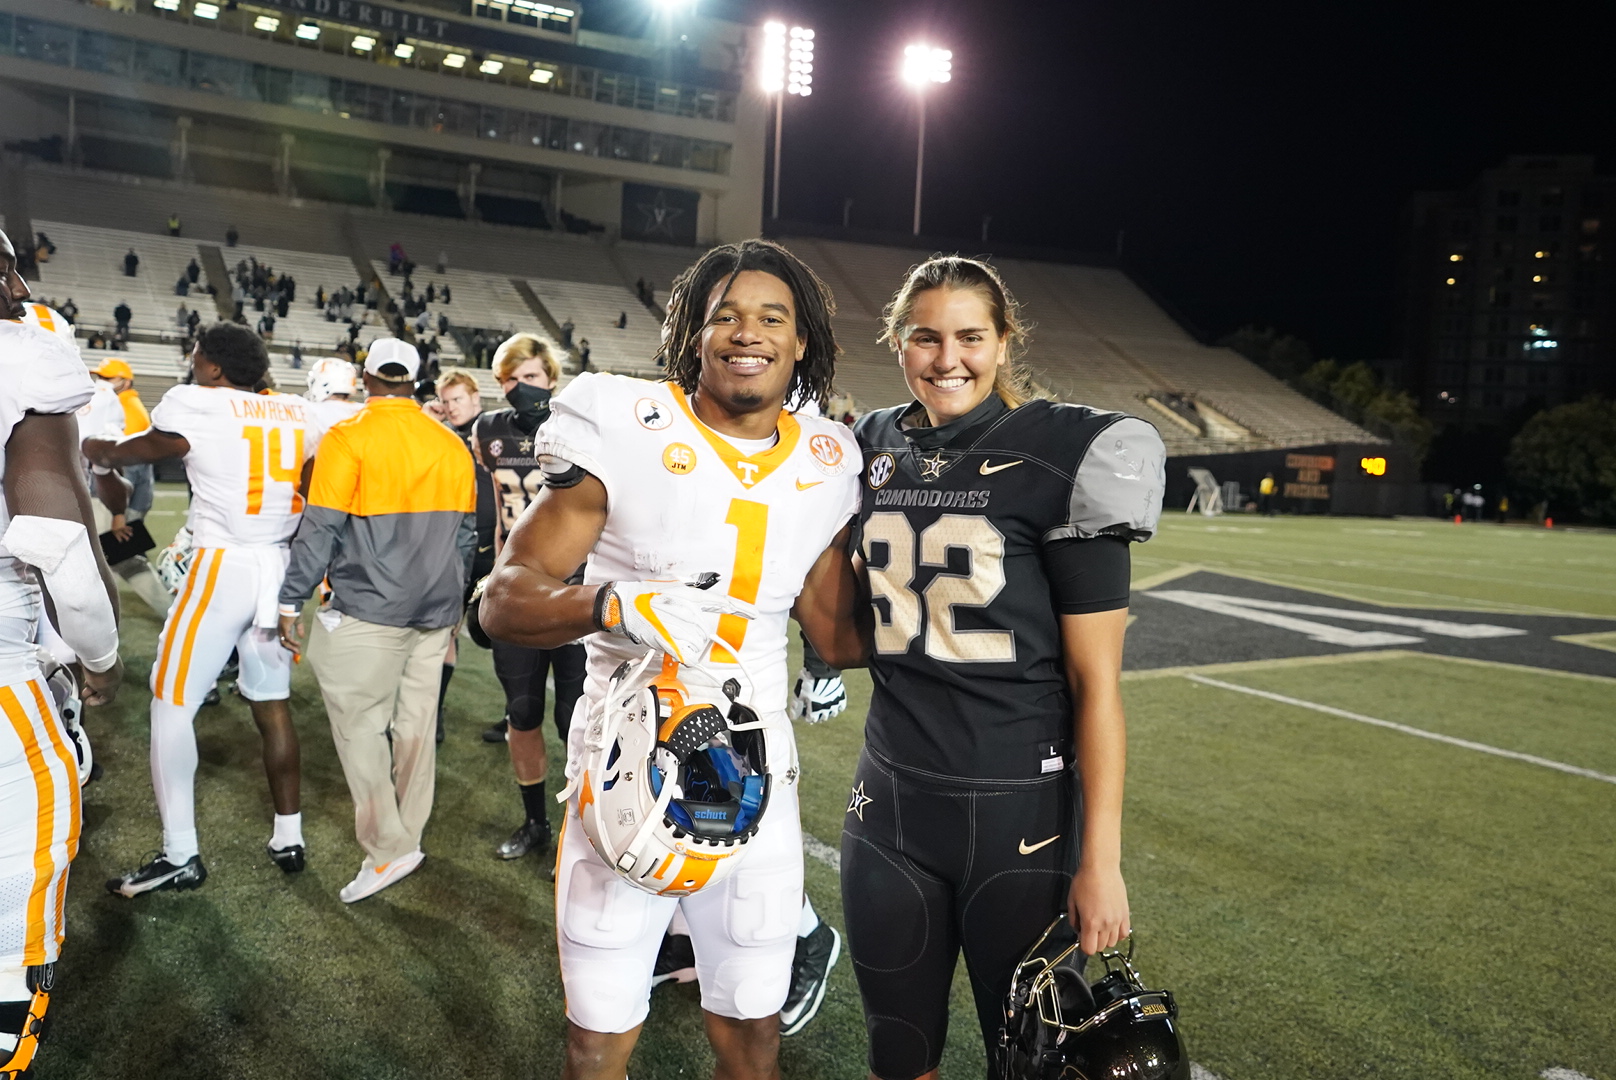 Sarah Fuller Makes History by Scoring First Points By A Woman in Collegiate Football